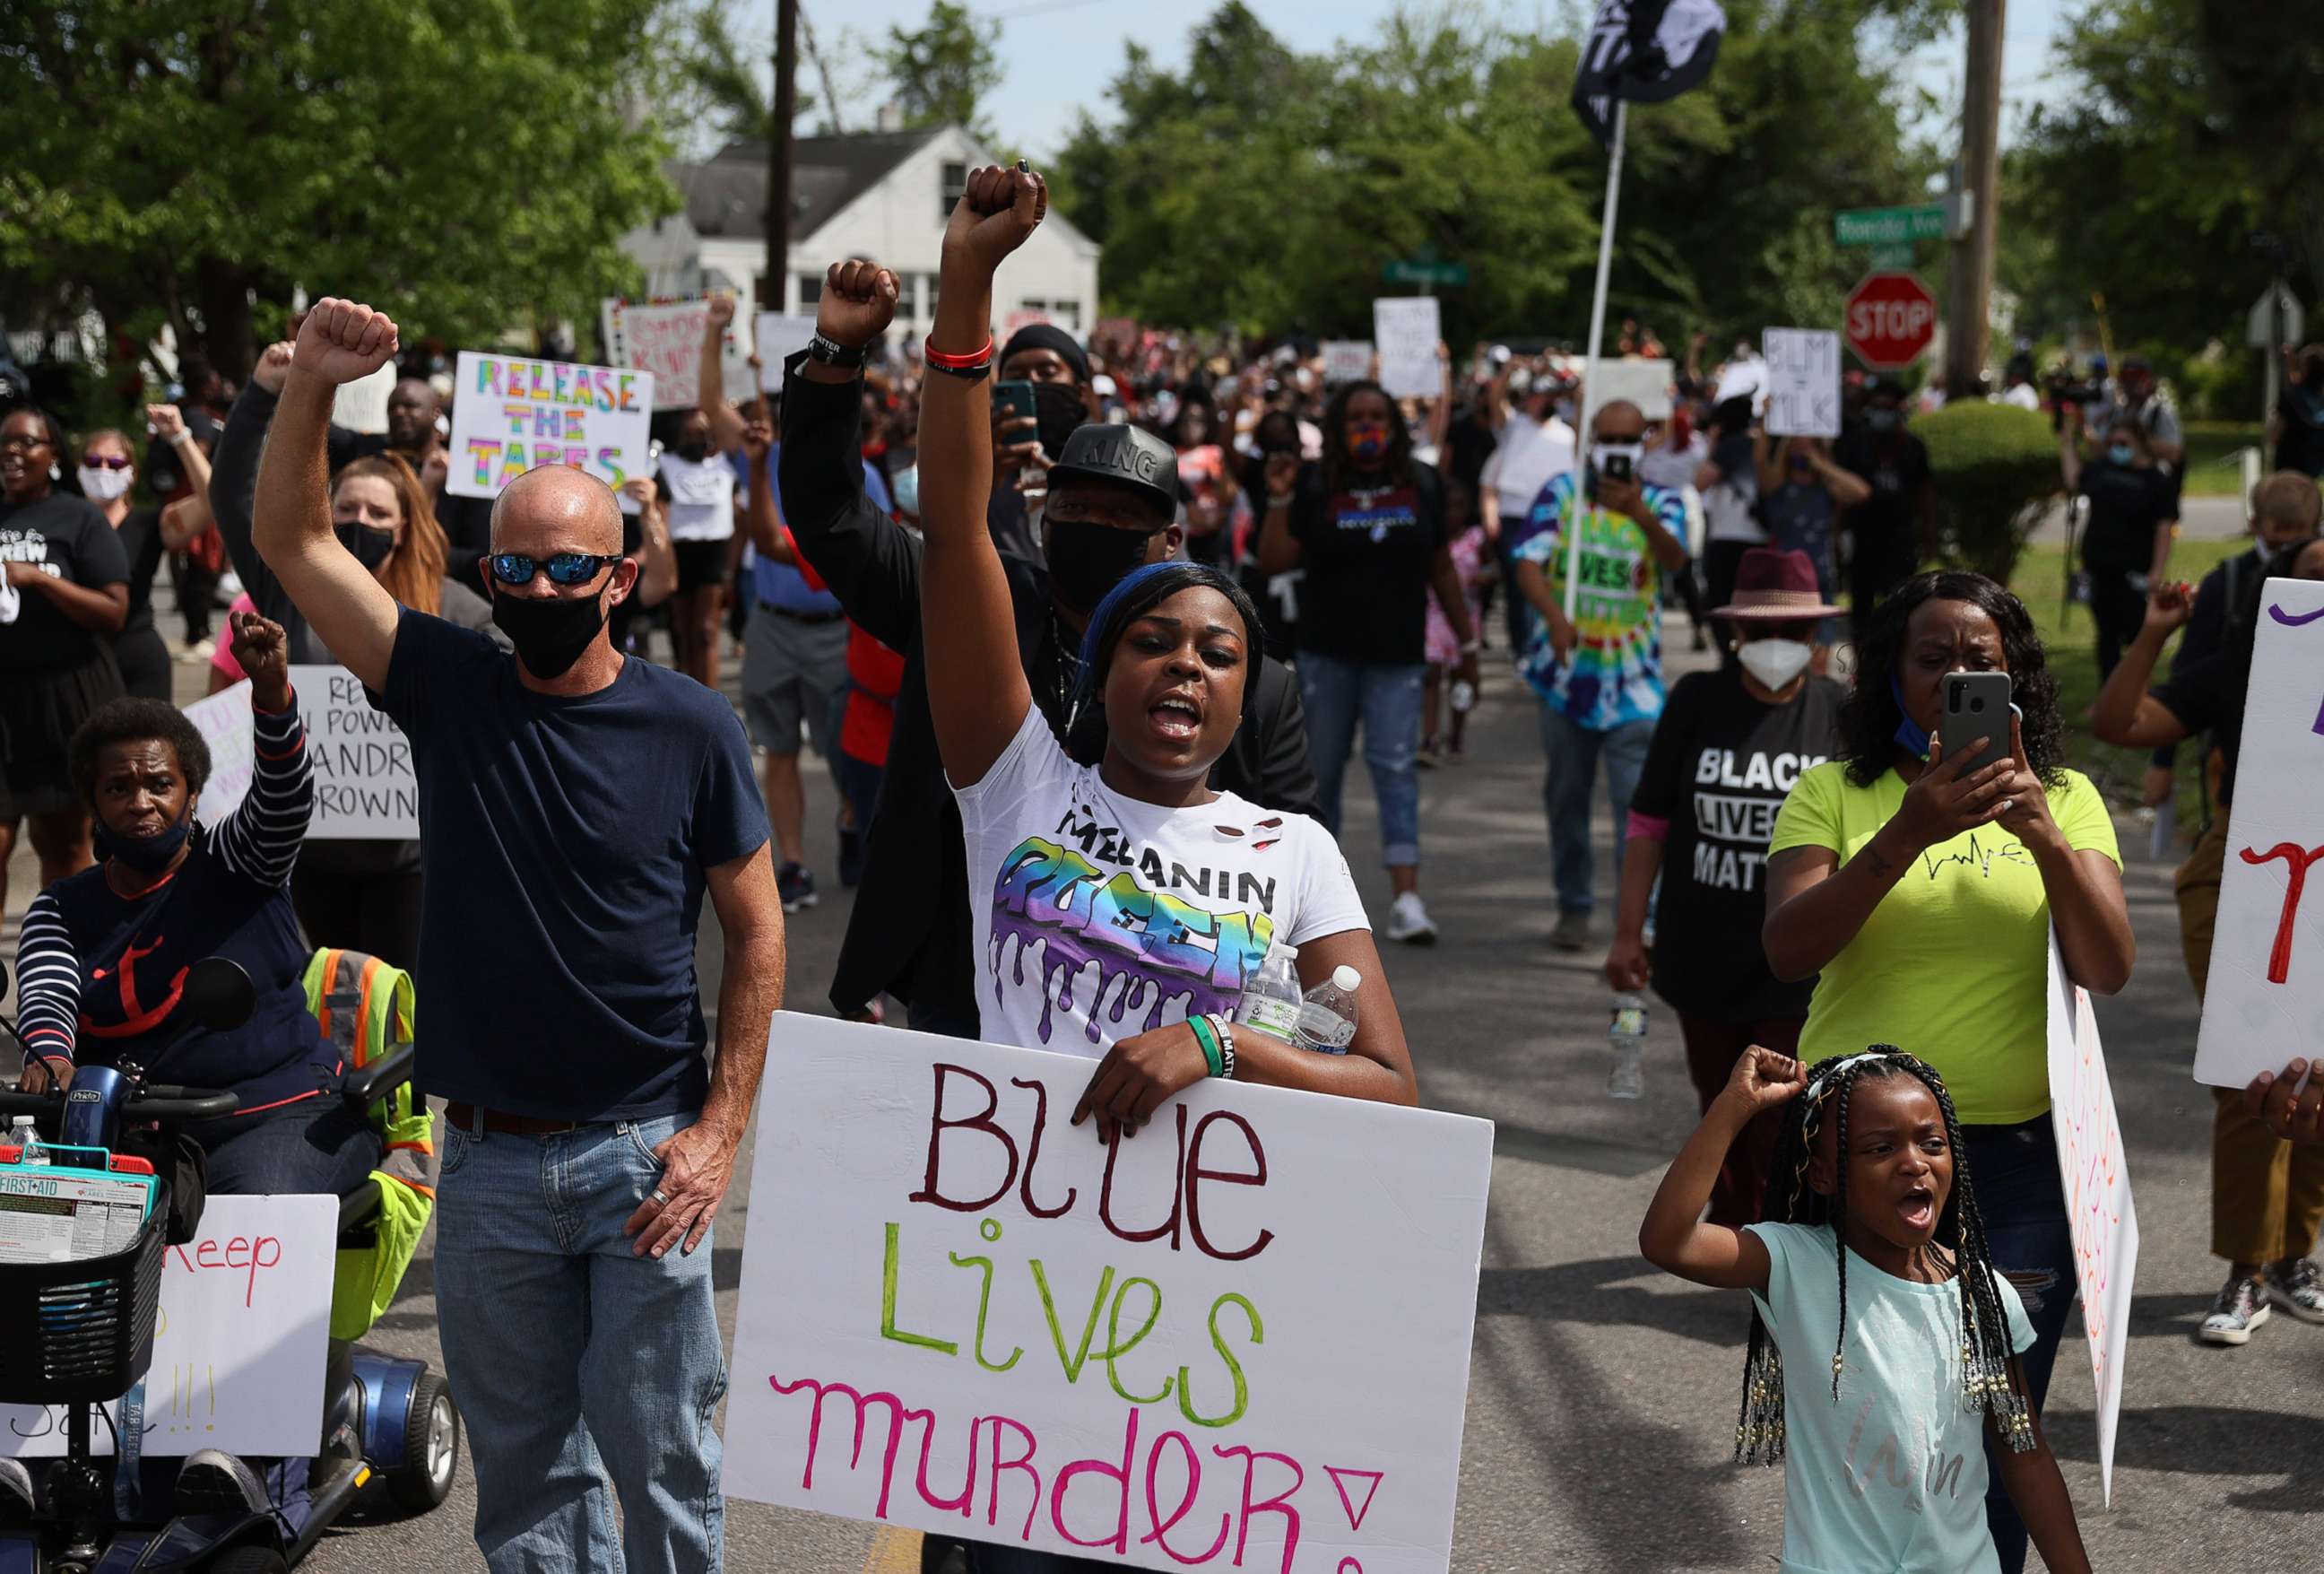 PHOTO: Protesters calling for justice in the shooting death of Andrew Brown Jr. by Pasquotank County Sheriff's deputies march through Elizabeth City, North Carolina, May 2, 2021.